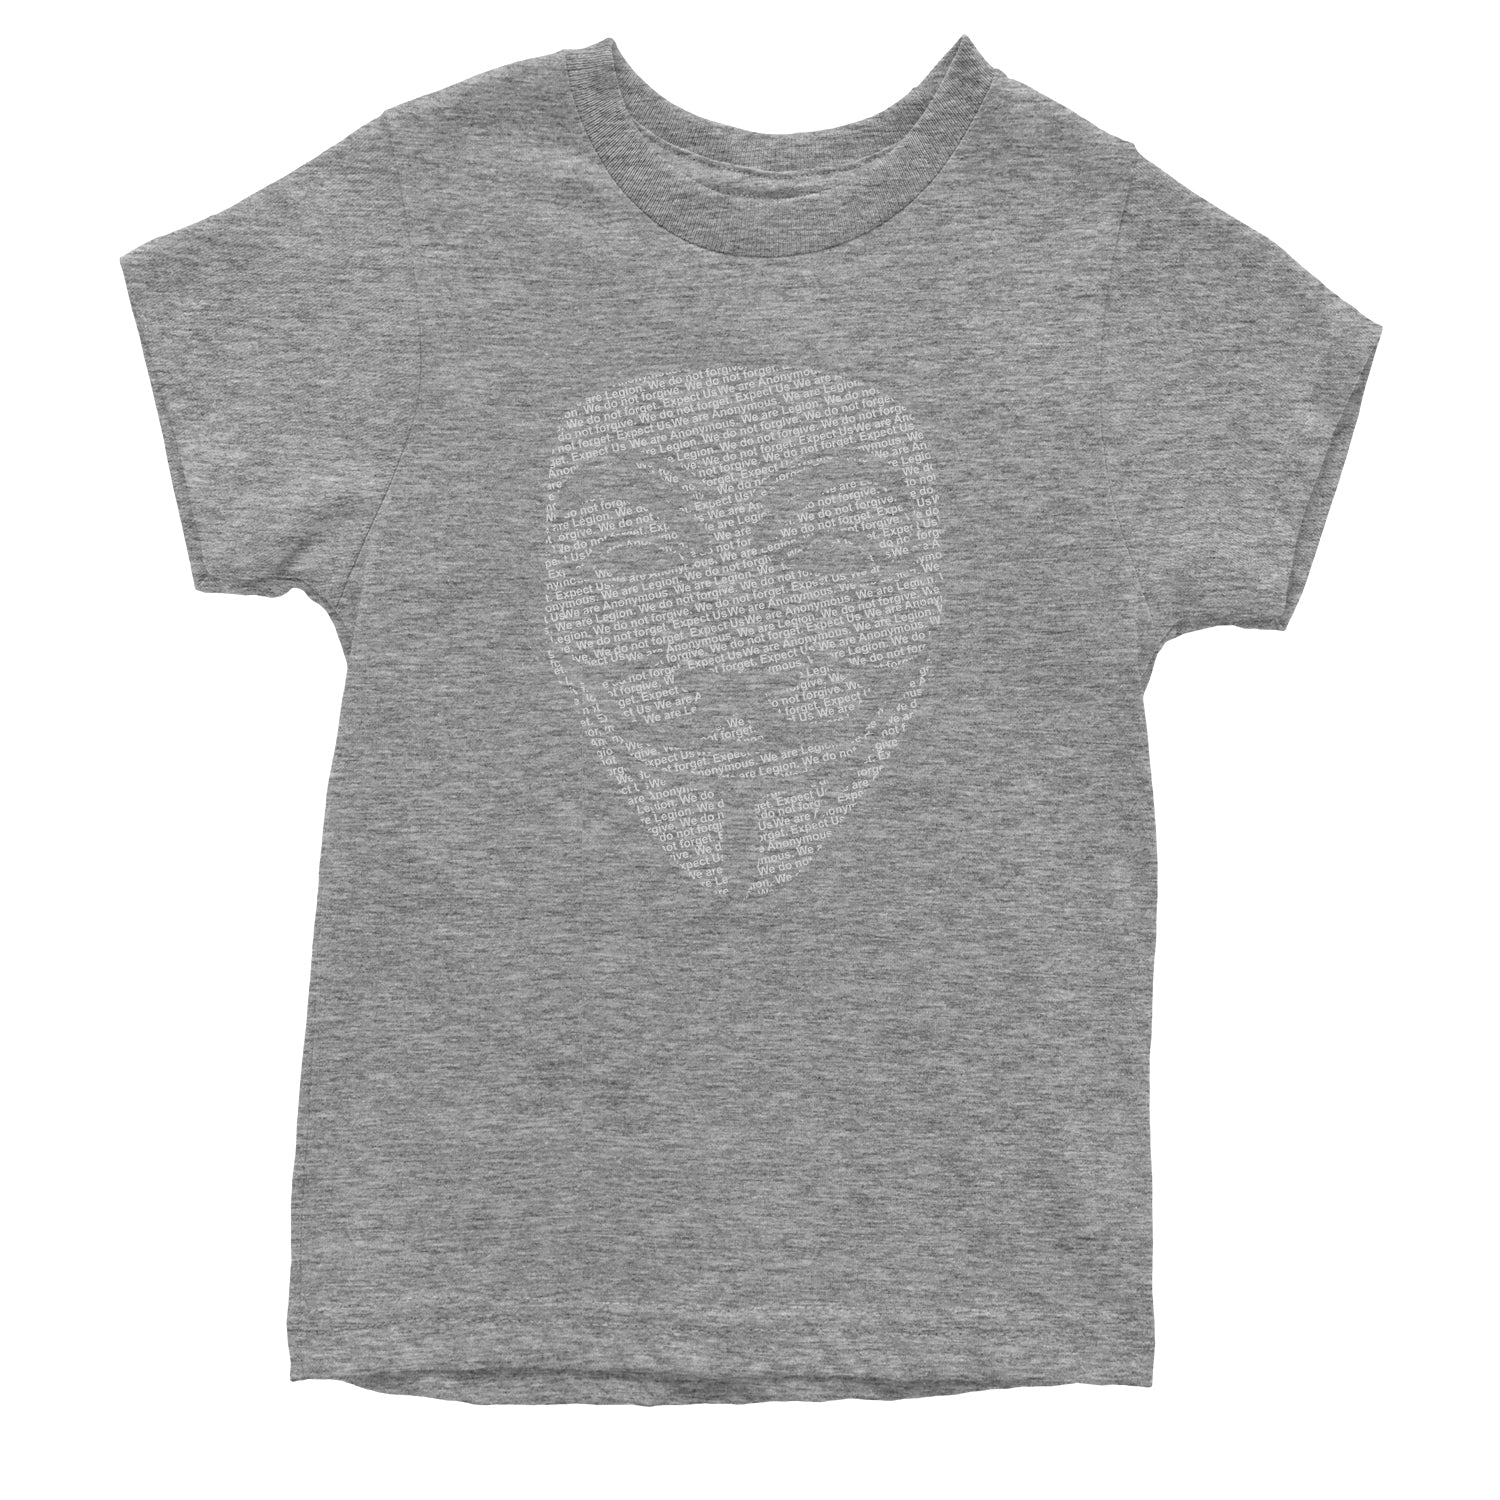 V For Vendetta Anonymous Mask Youth T-shirt #expressiontees by Expression Tees